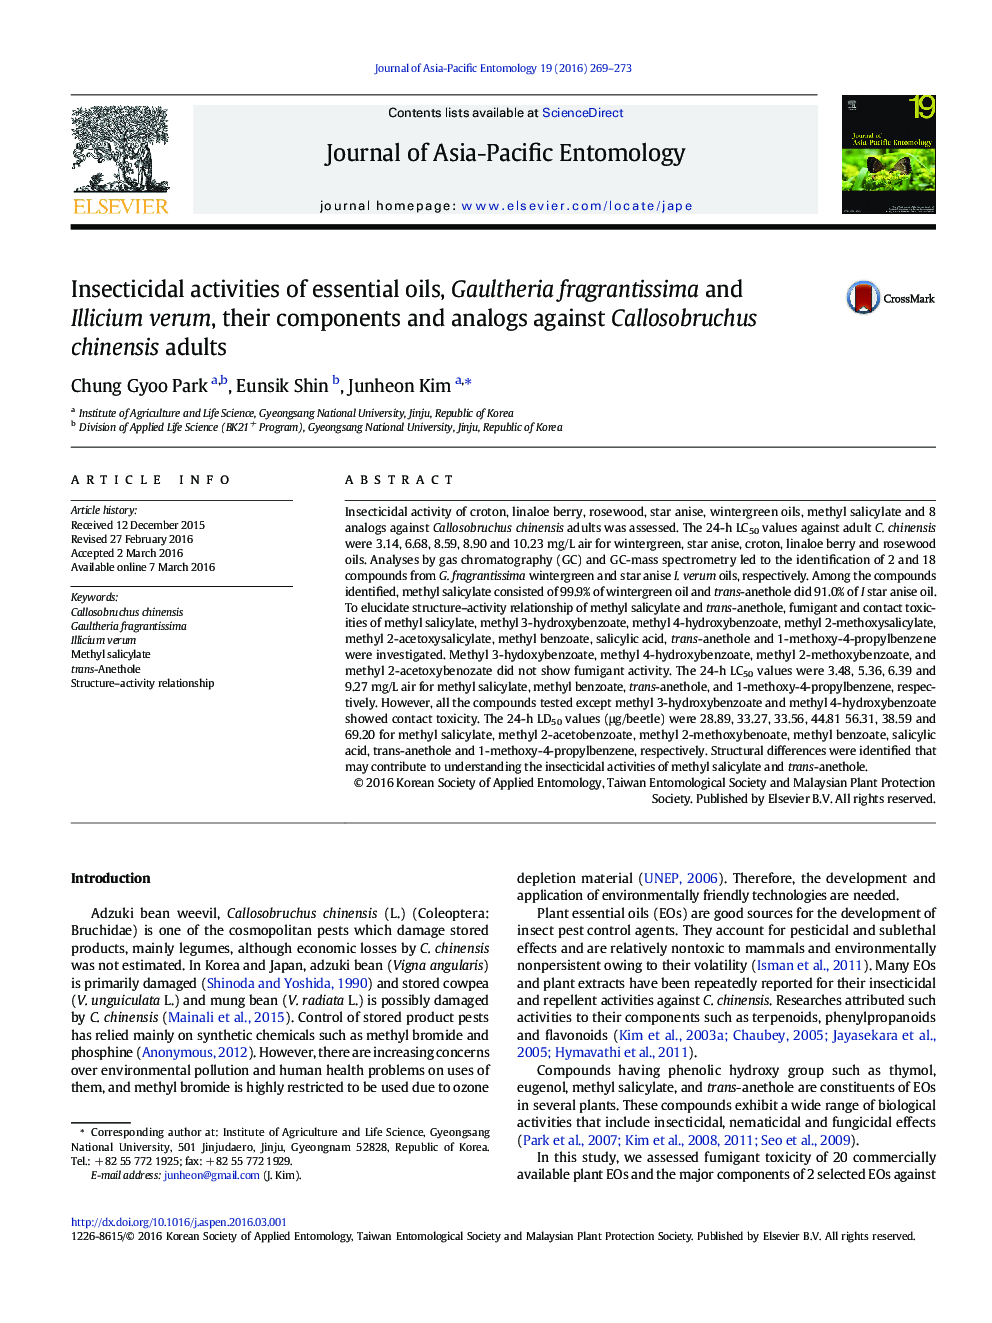 Insecticidal activities of essential oils, Gaultheria fragrantissima and Illicium verum, their components and analogs against Callosobruchus chinensis adults